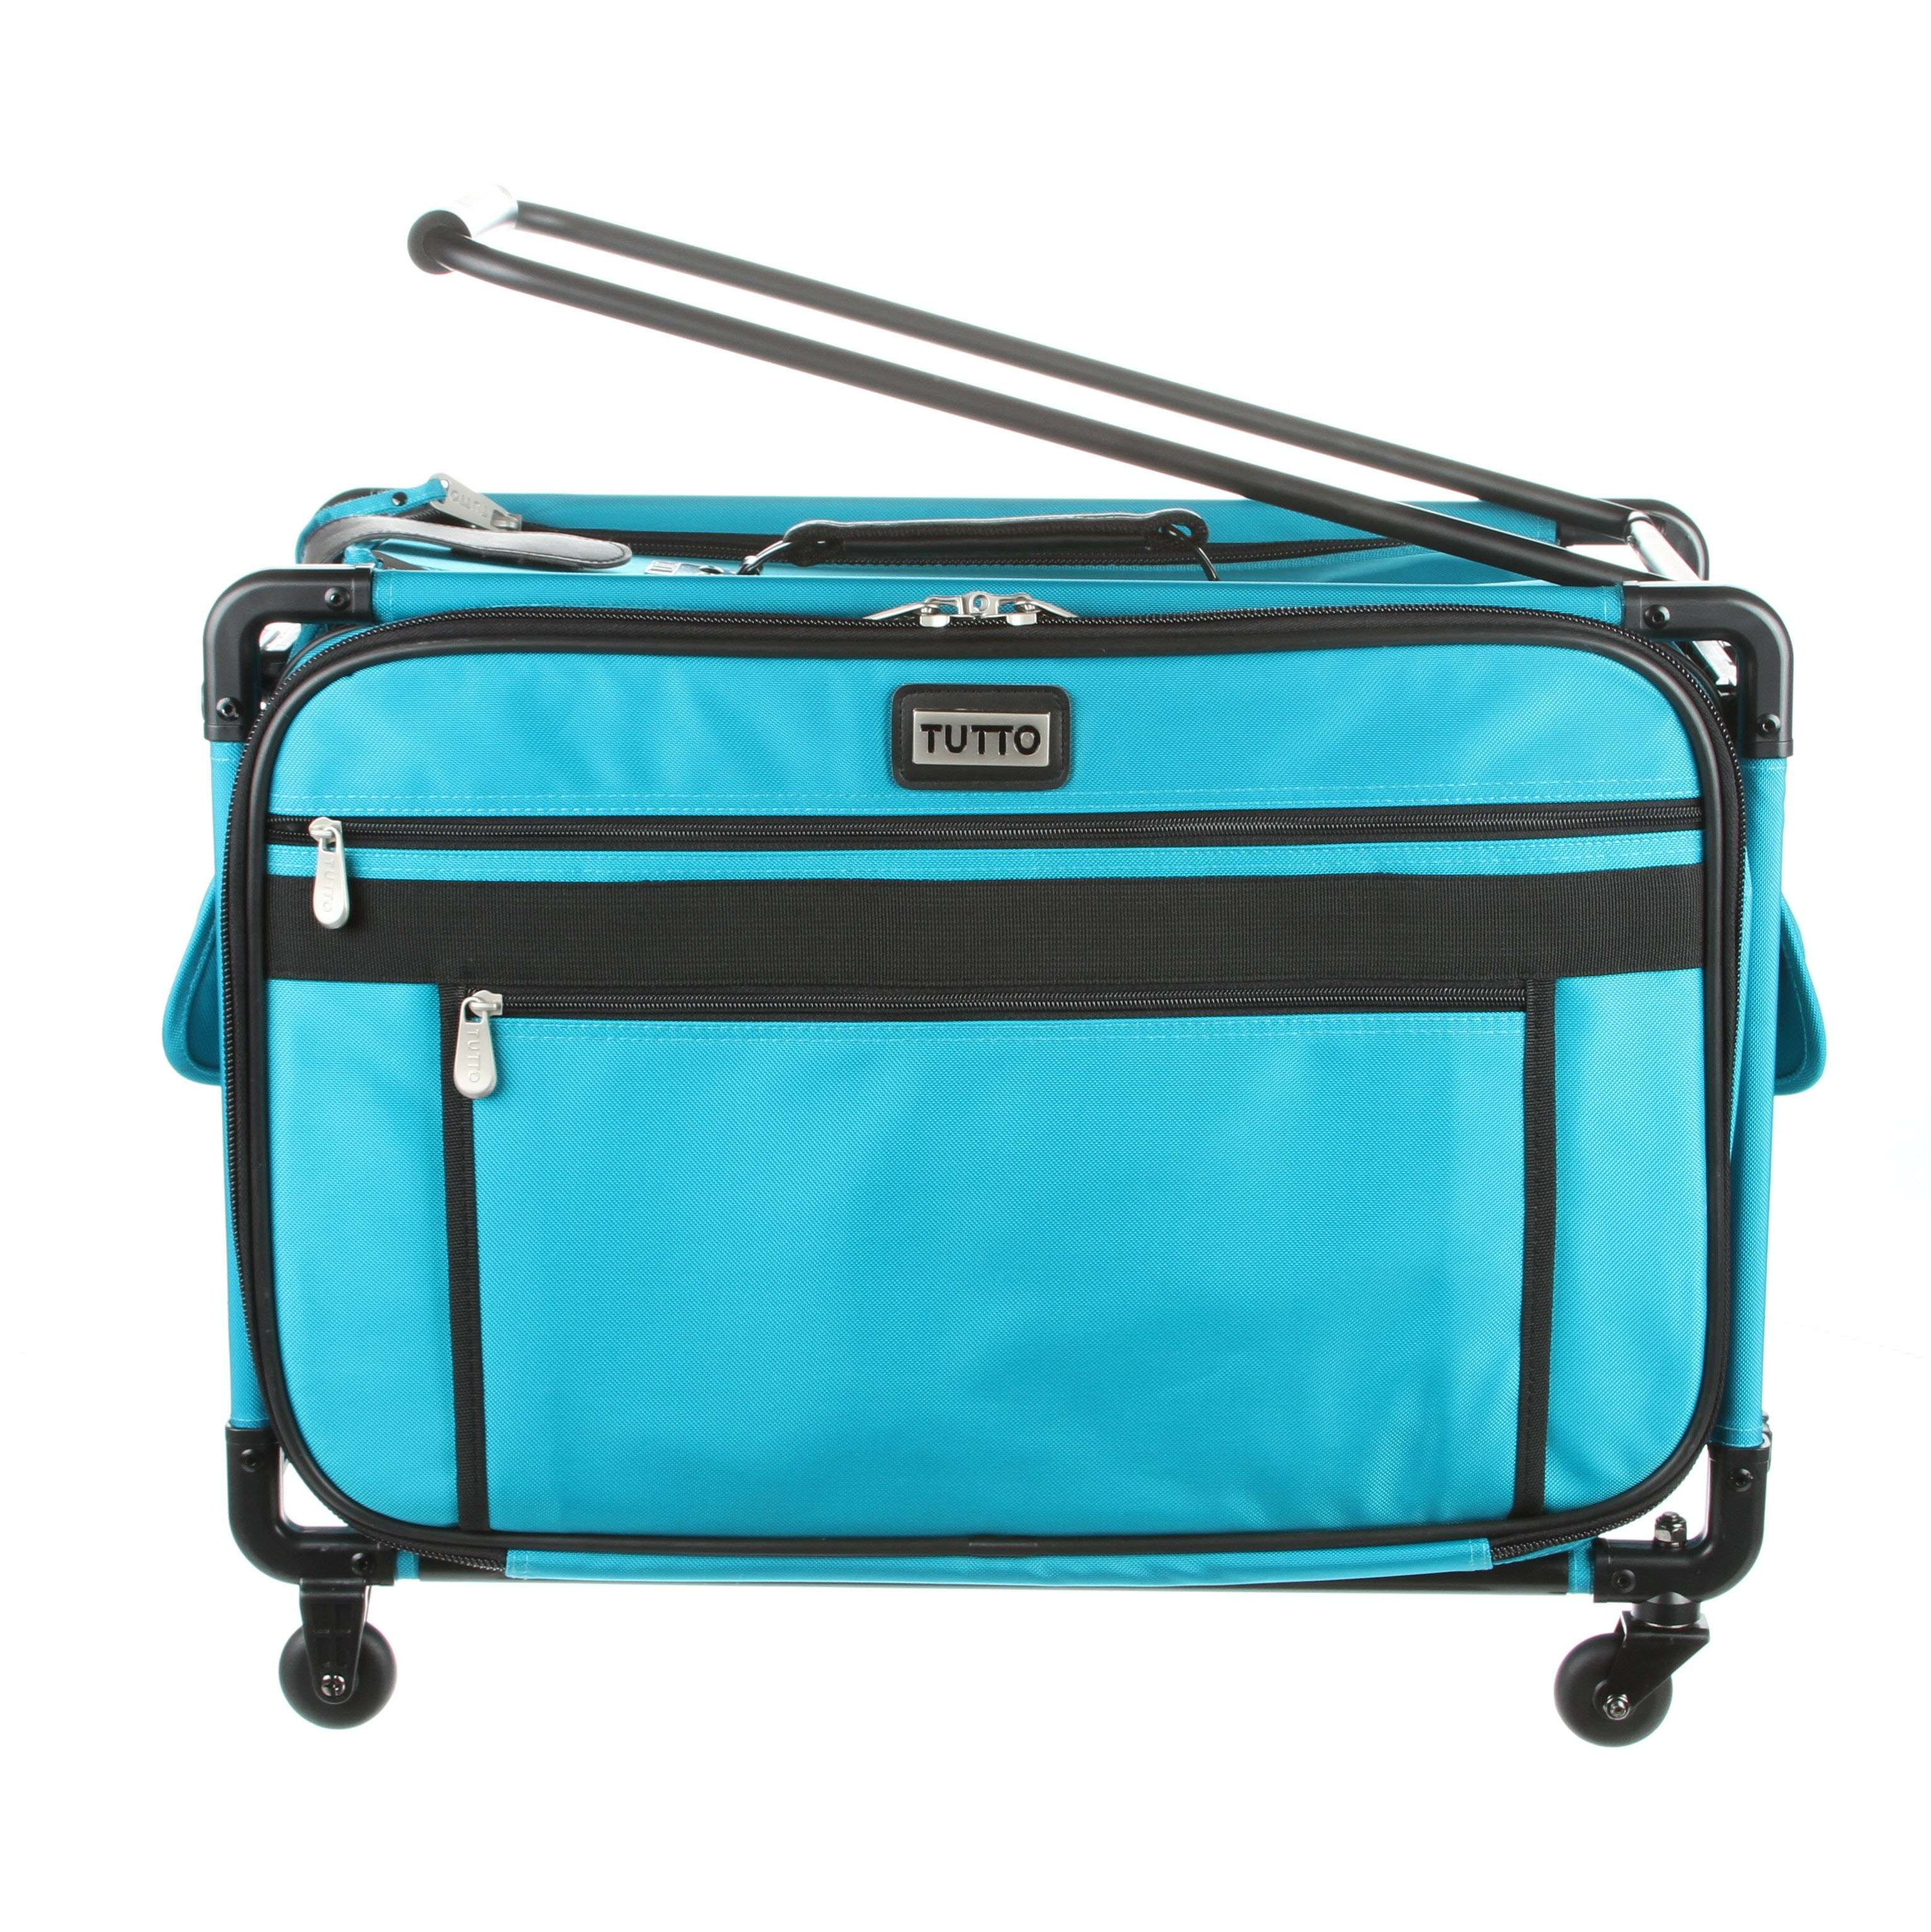  Tutto Machine On Wheels (Turquoise, 22-Inch)